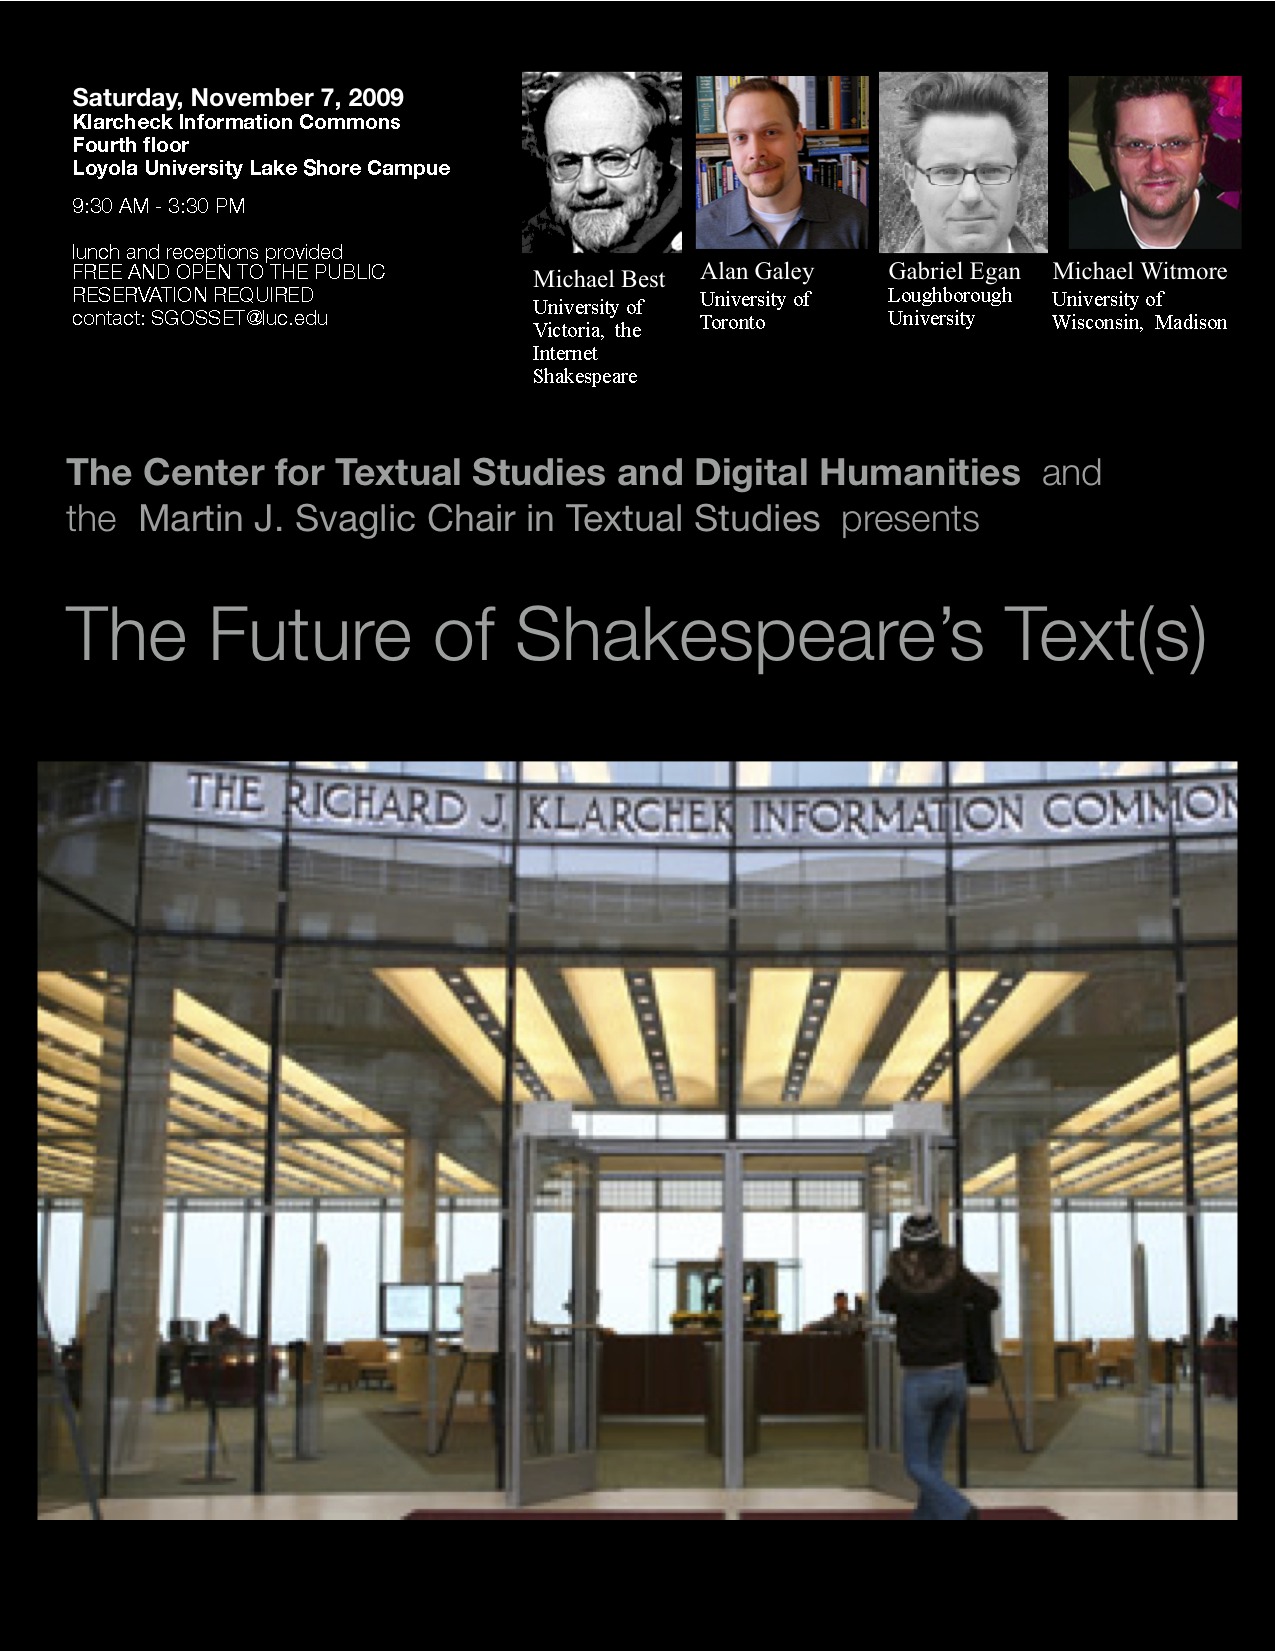 The Future of Shakespeare’s Texts - Michael Best, Alan Galey, Gabriel Egan, Michael Witmore, November 7, 2009
